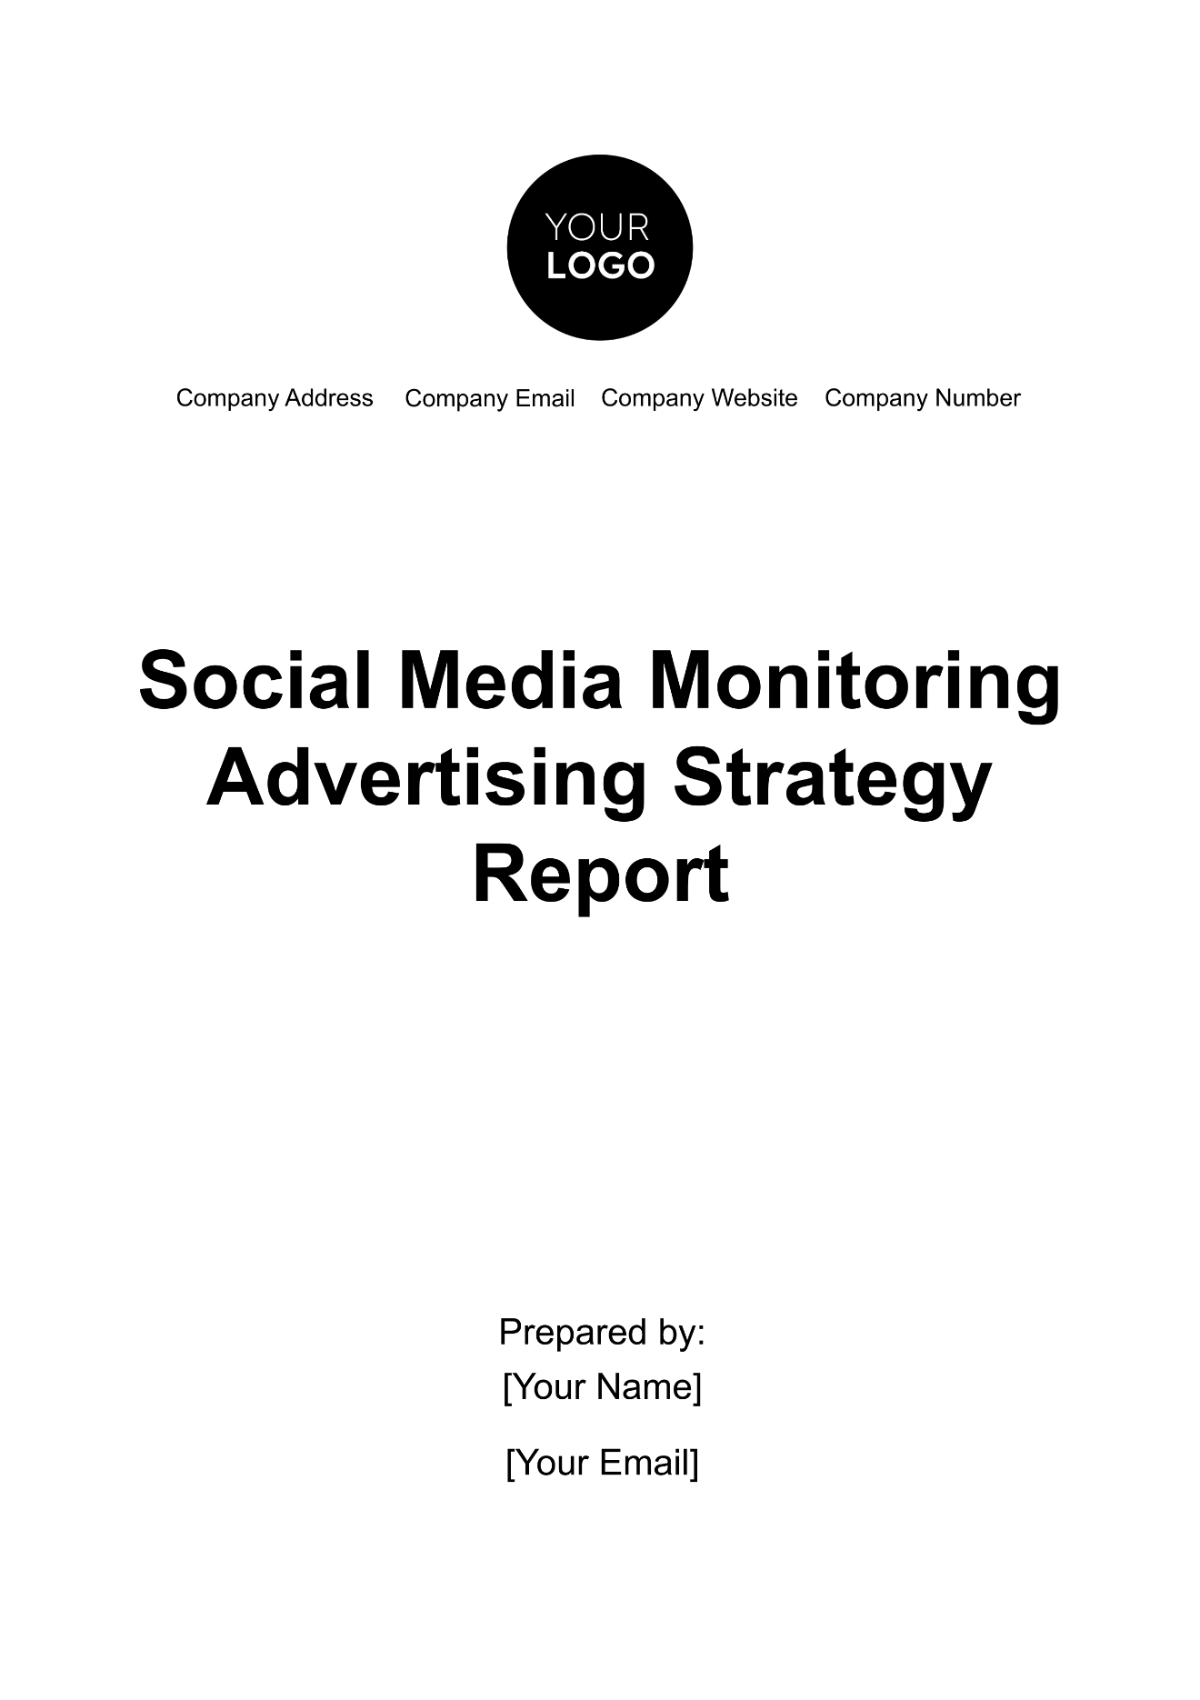 Social Media Monitoring Advertising Strategy Report Template